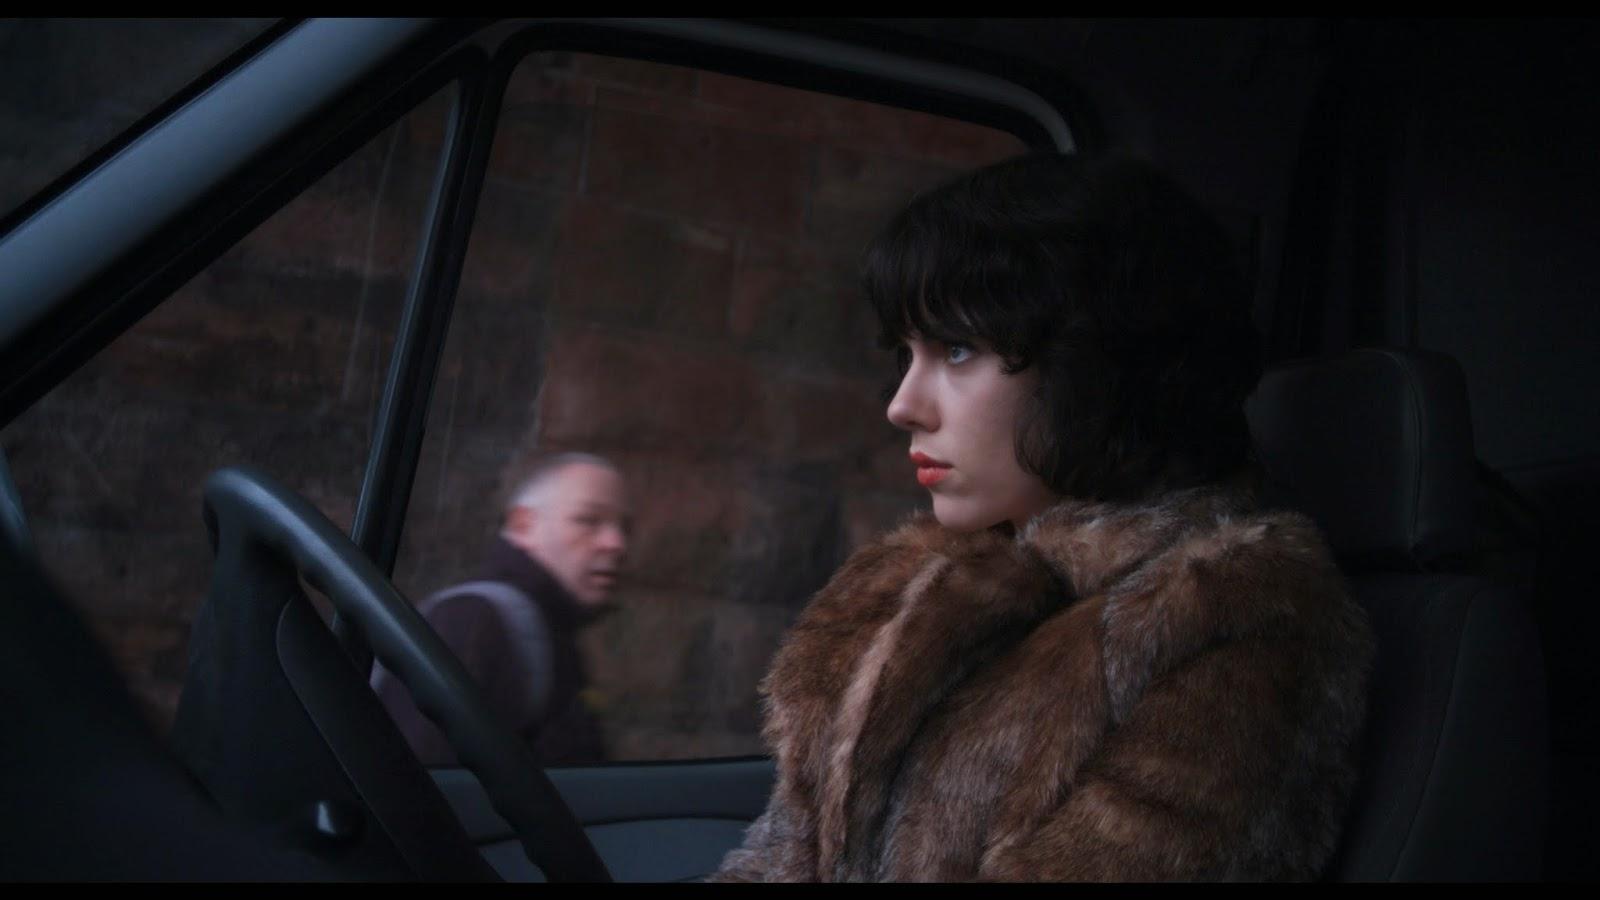 CINEMA: Cycle Contamination - Under the Skin (2013) ou le contaminateur contaminé / or the contaminated contaminator